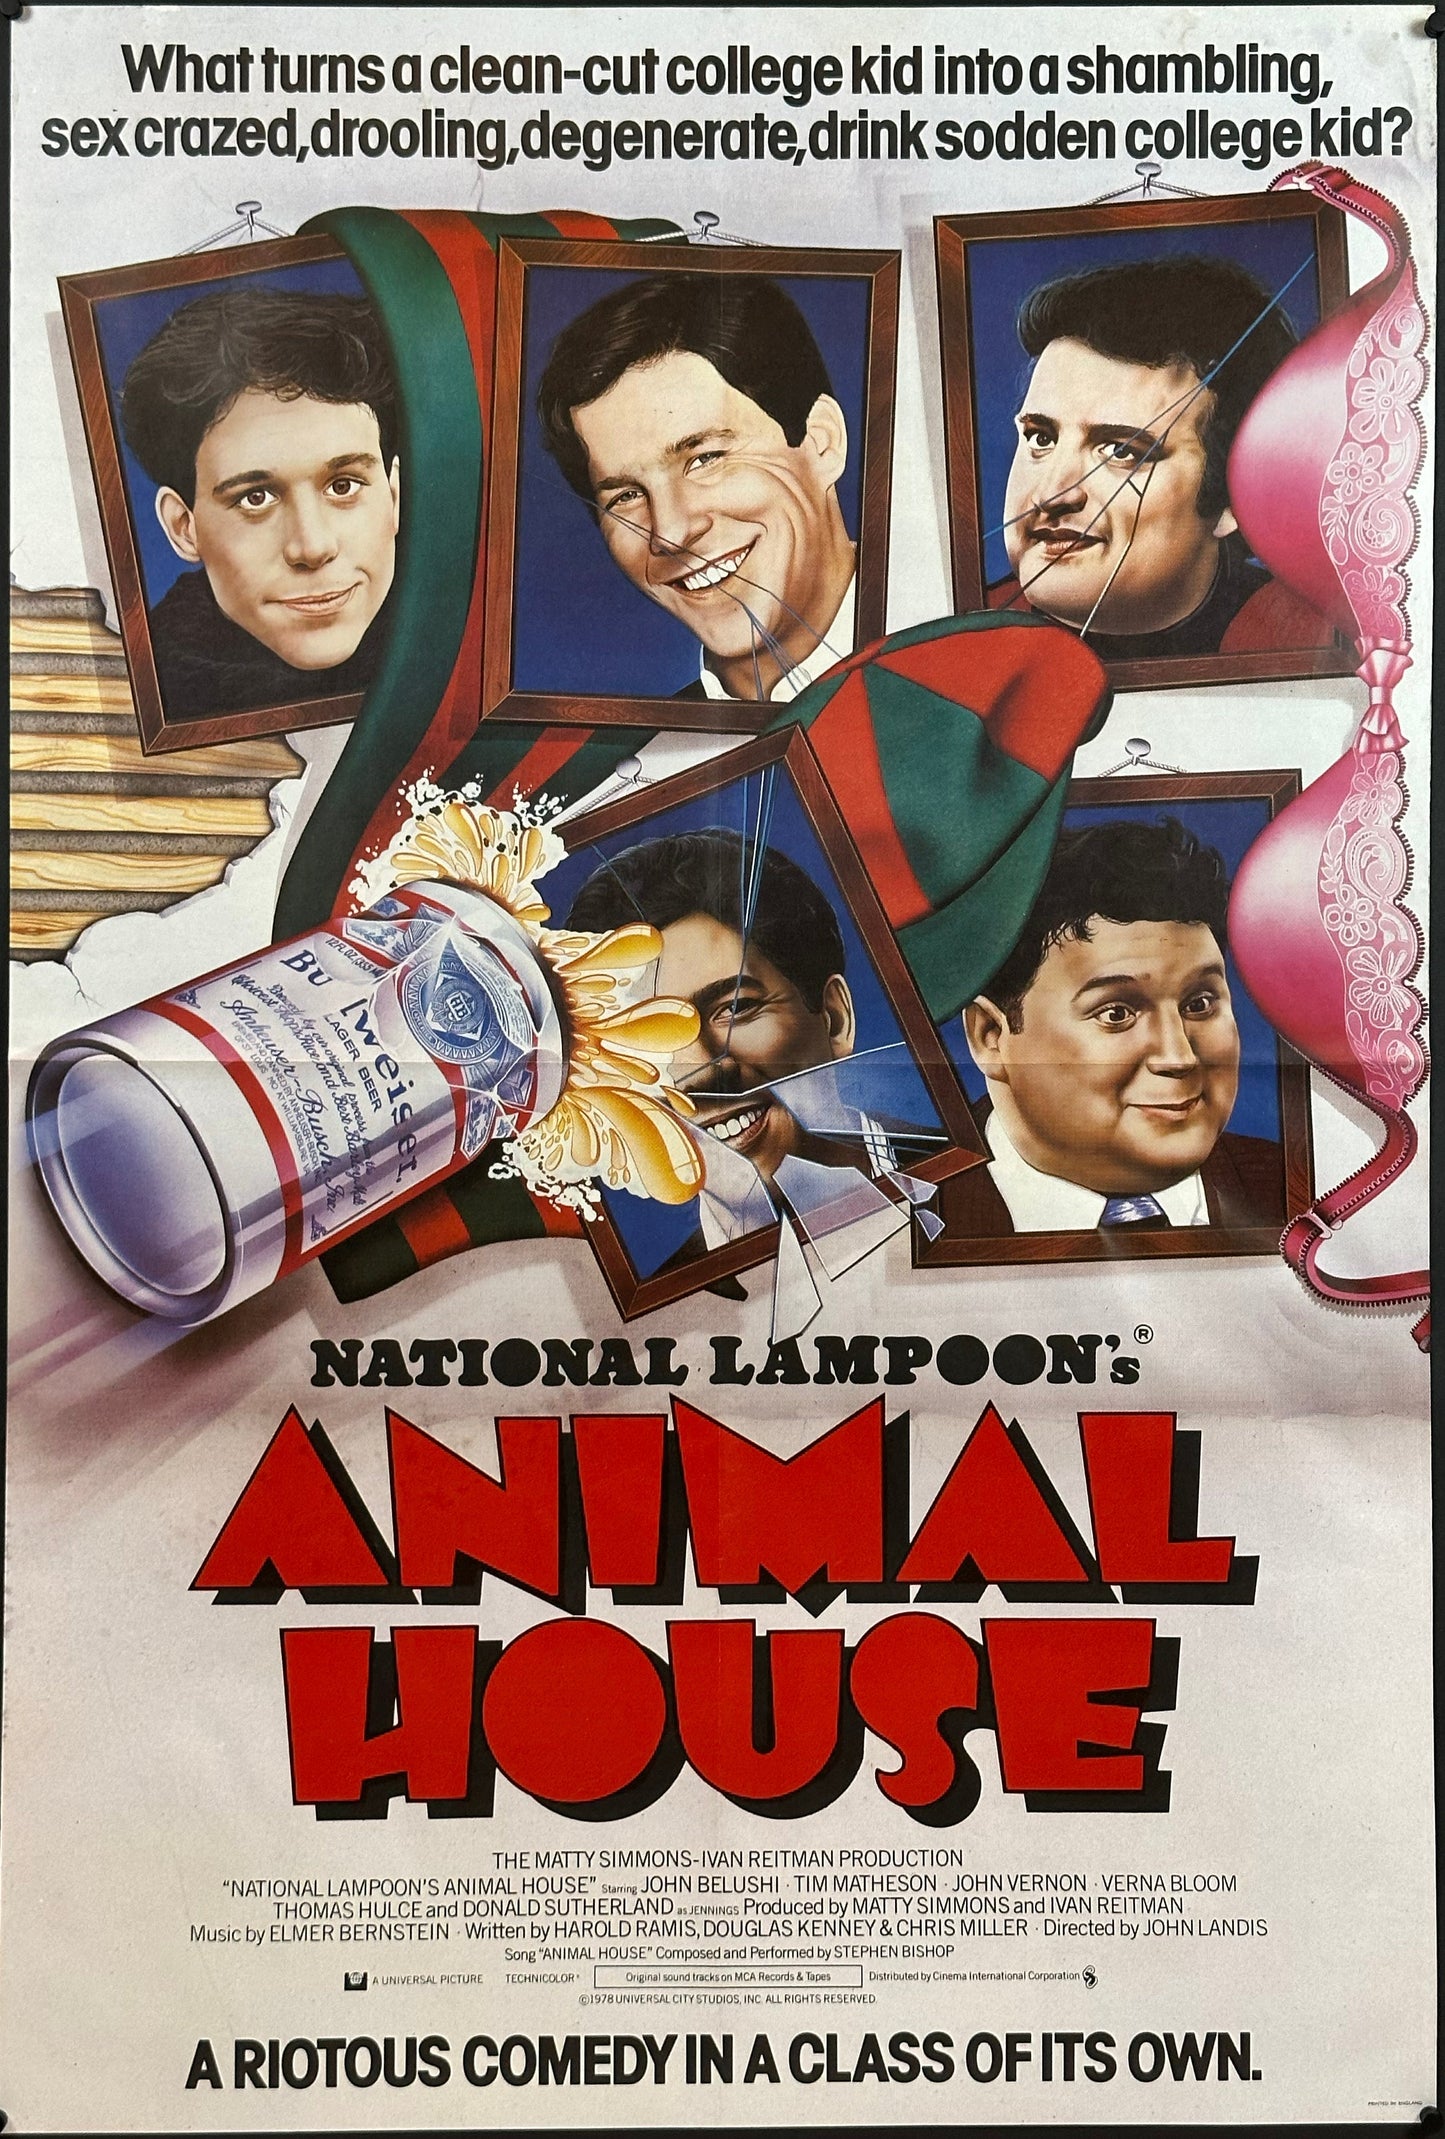 National Lampoon's Animal House British One Sheet (1978) - ORIGINAL RELEASE - posterpalace.com